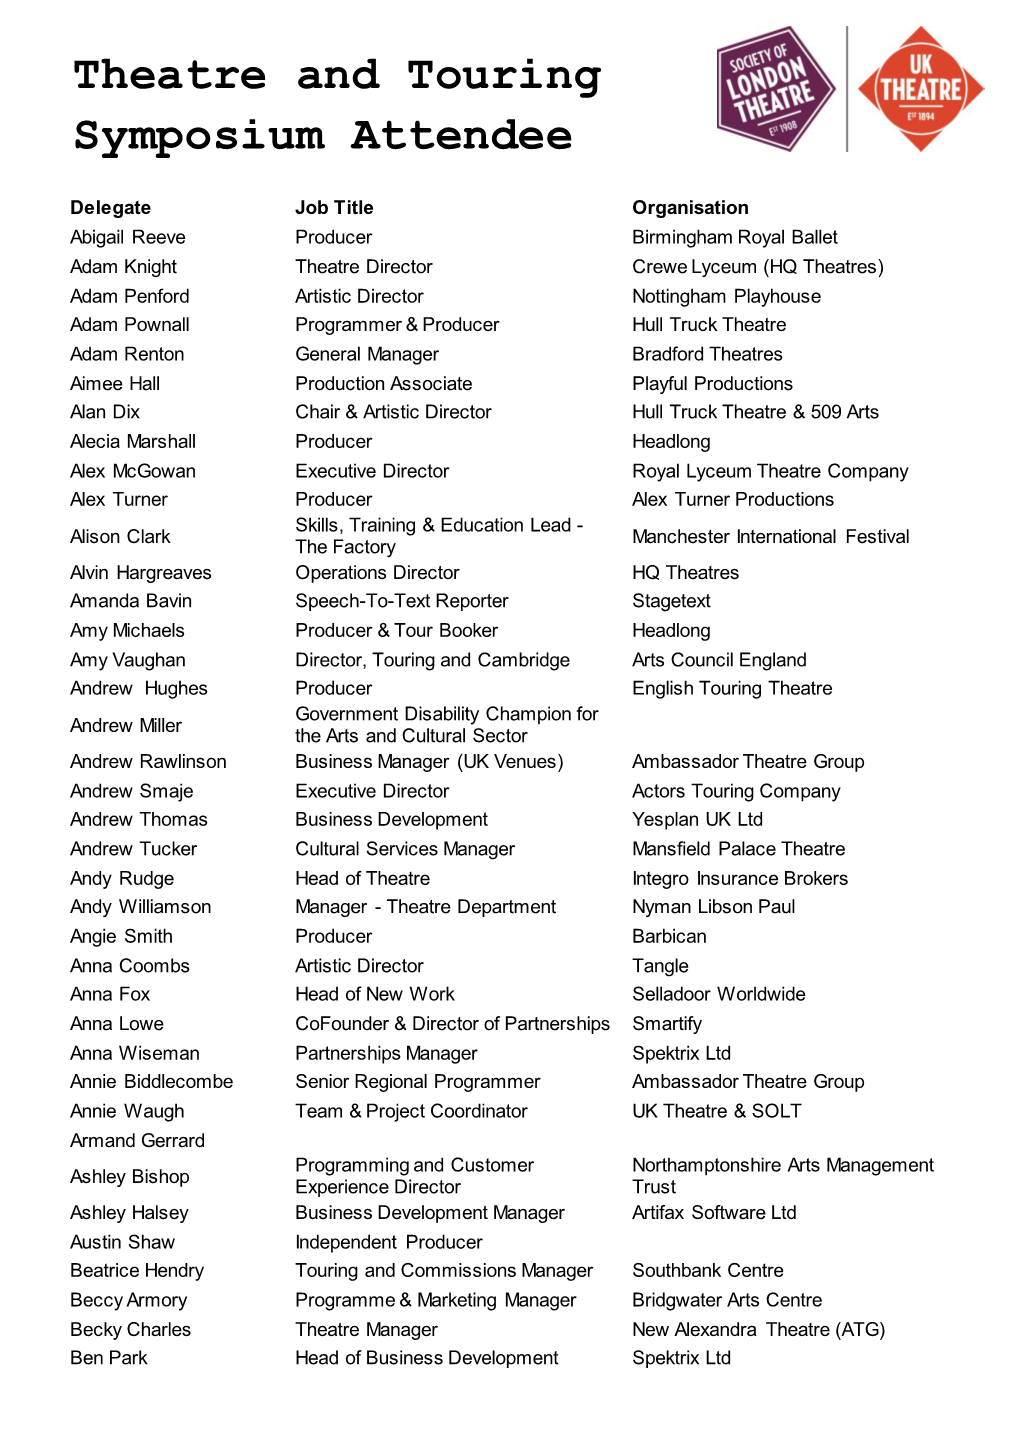 Theatre and Touring Symposium Attendee List